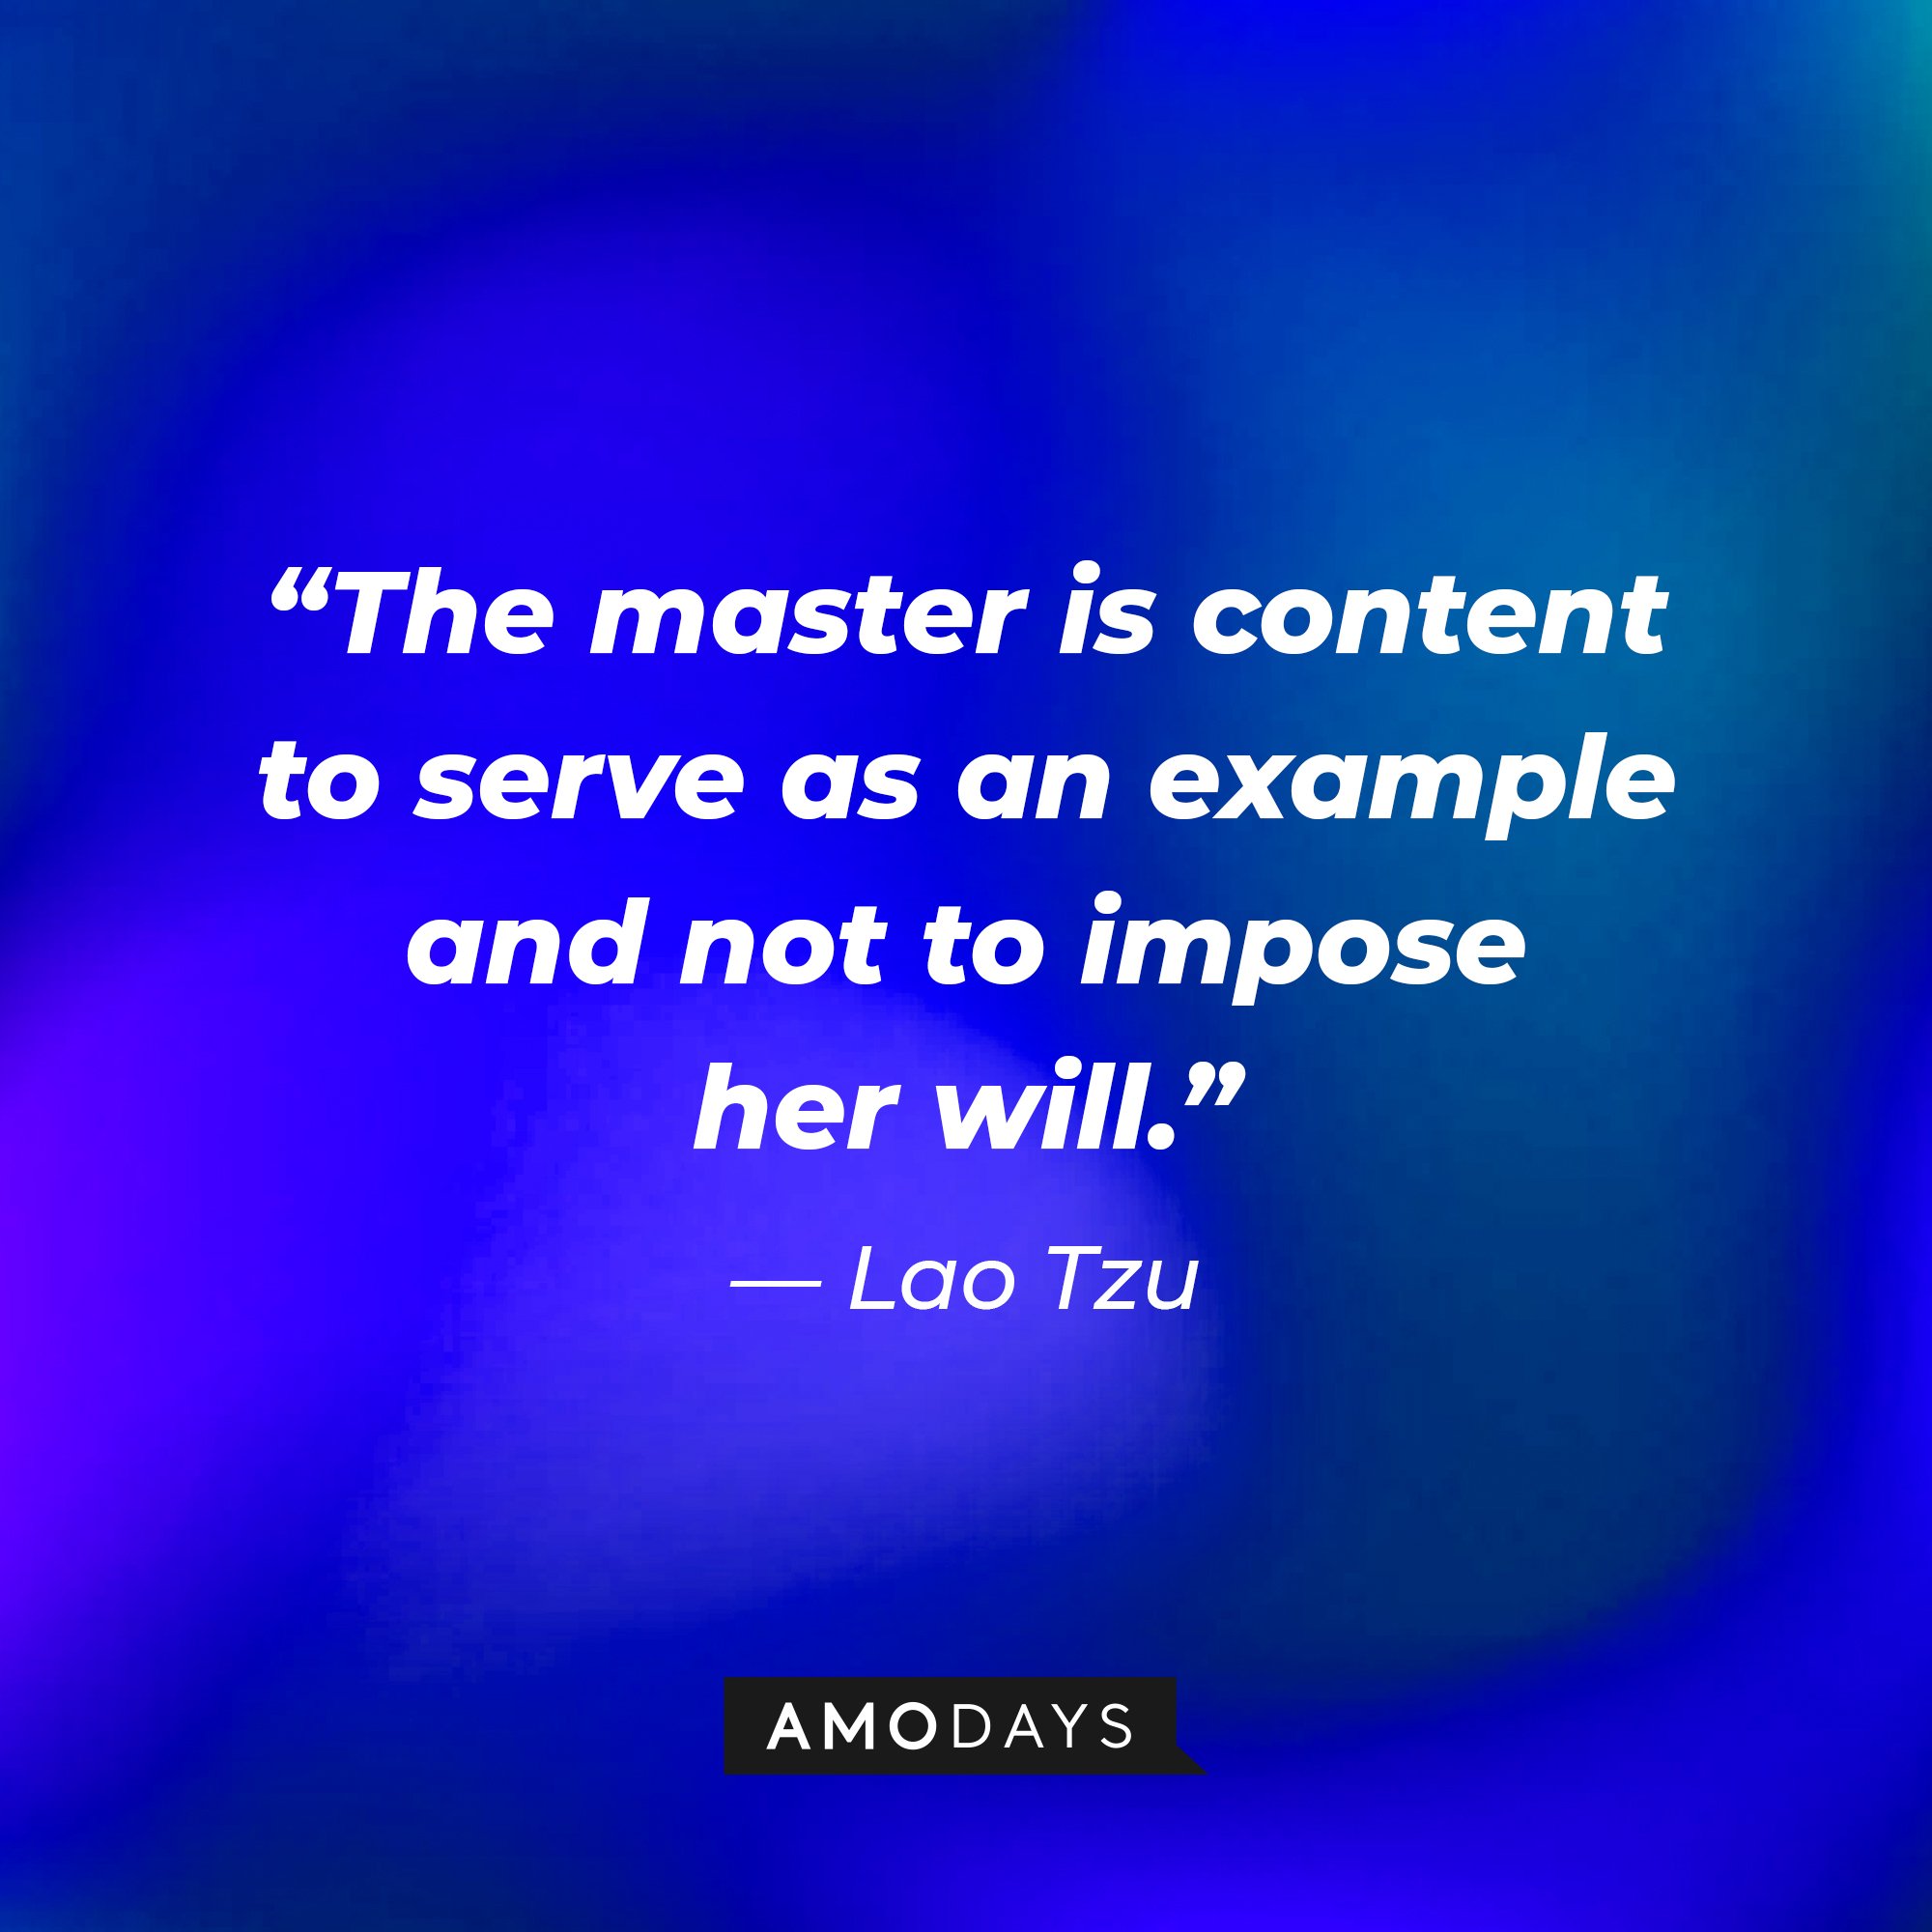  Lao Tzu's quote: “The master is content to serve as an example and not to impose her will.” | Image: AmoDays 